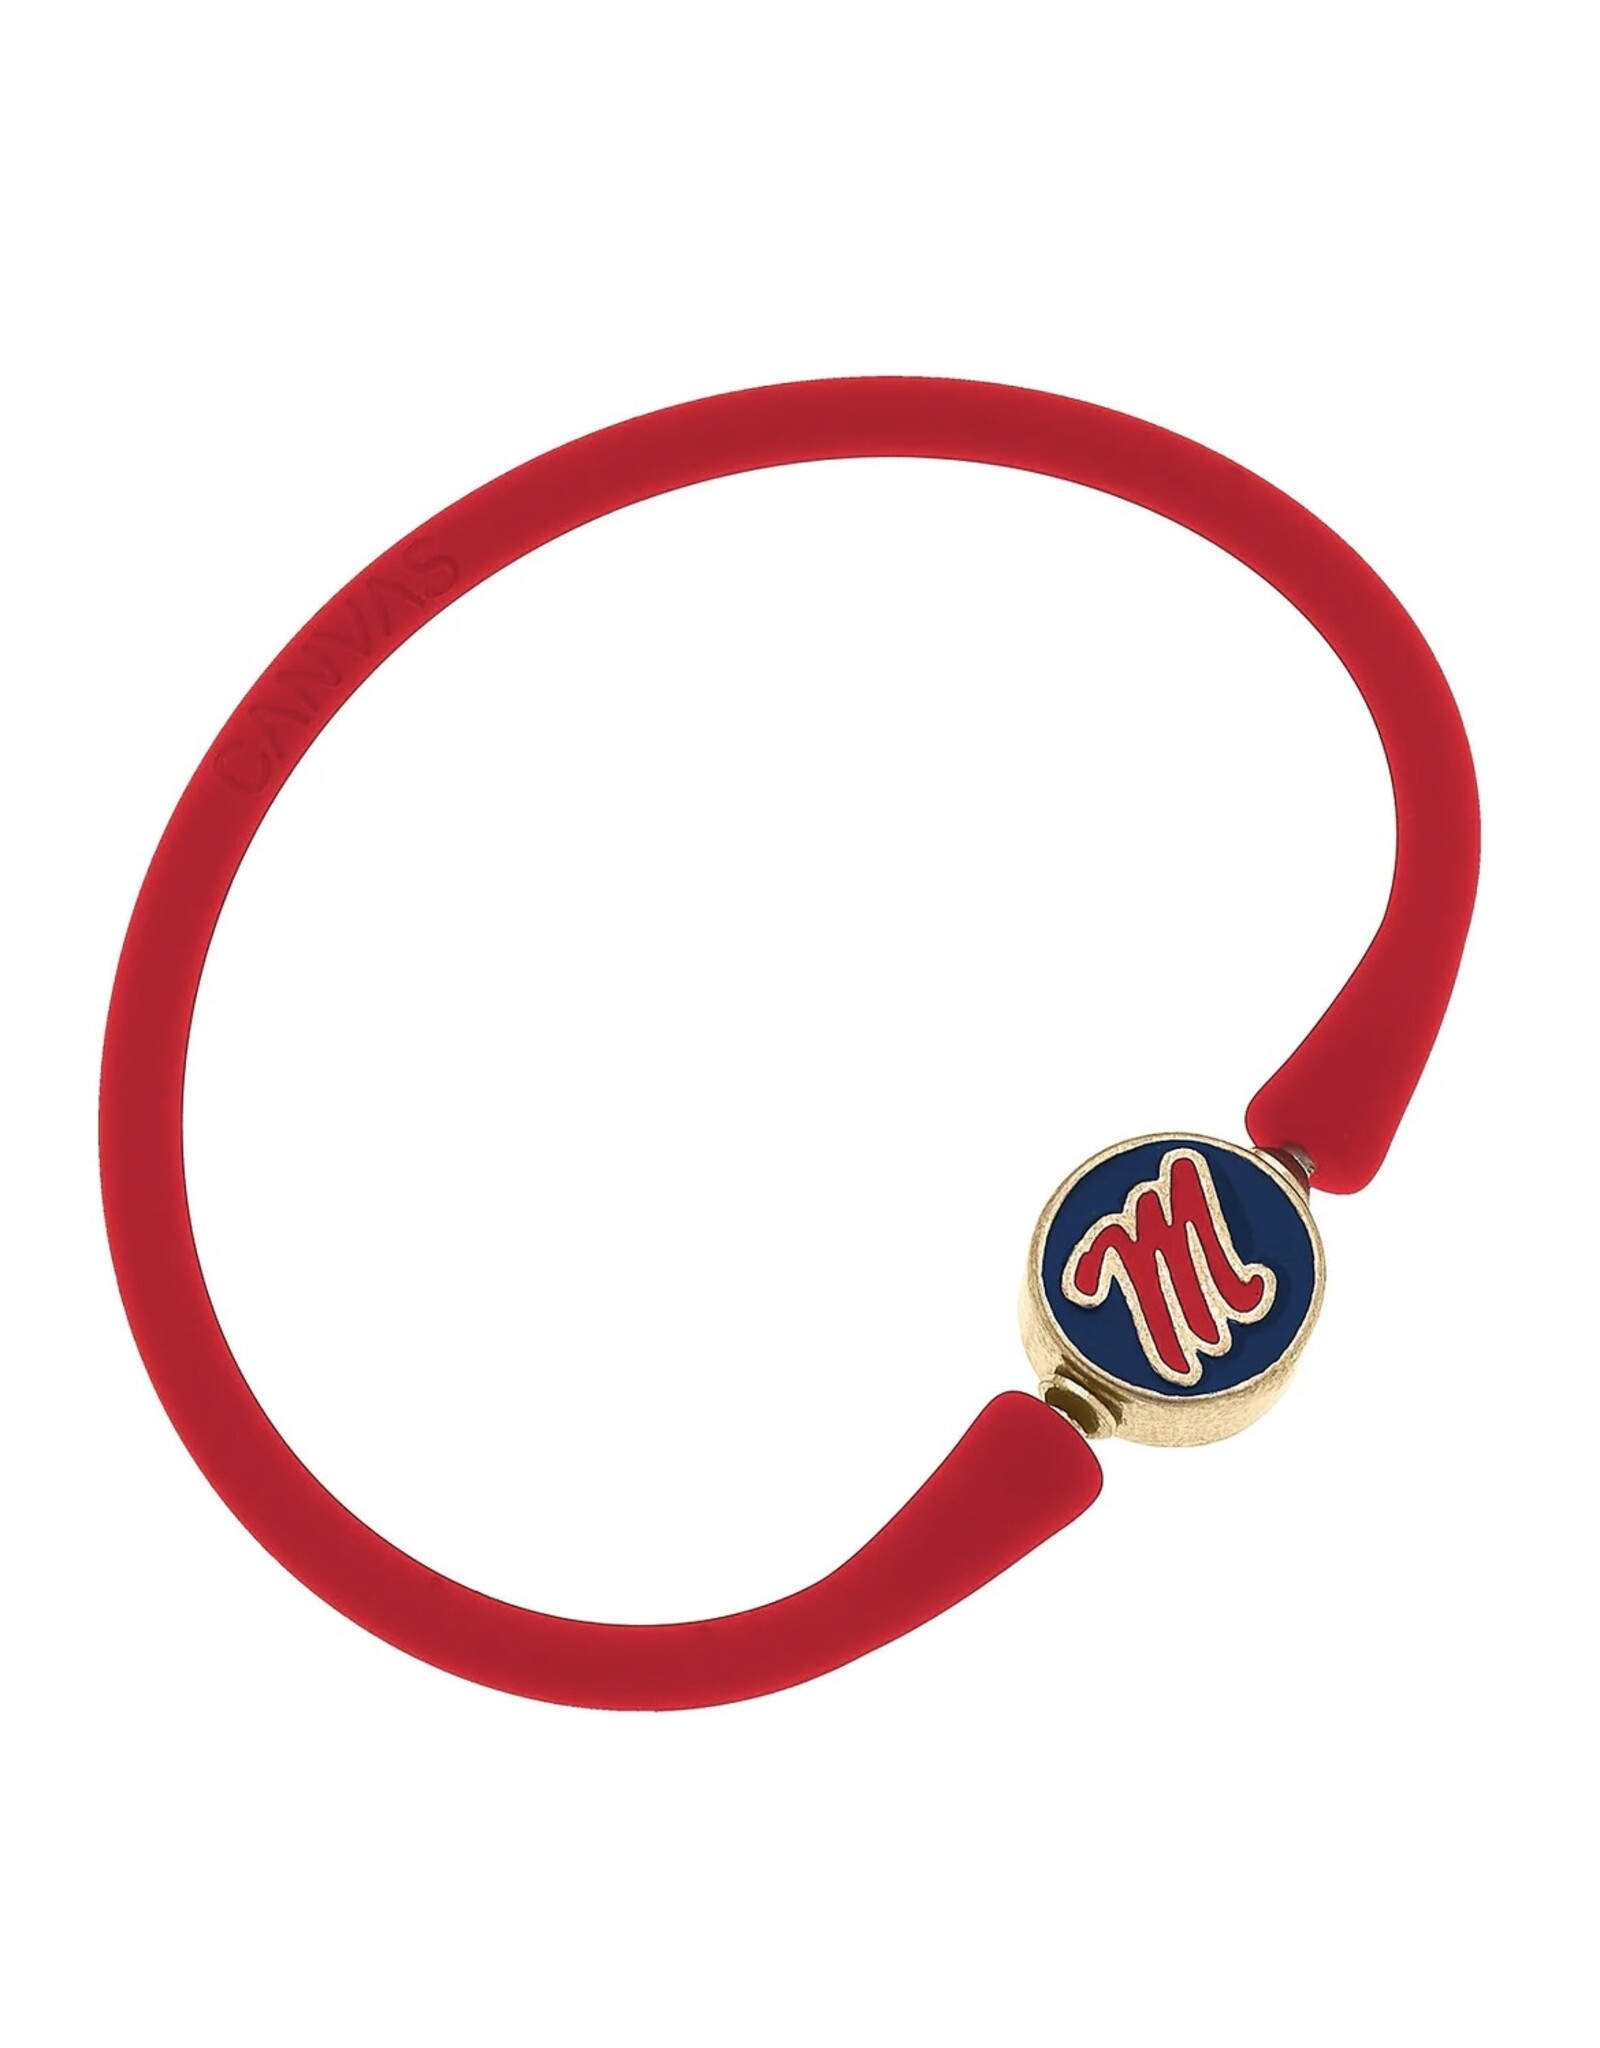 Ole South of Silicone 23131B-MS-RD] in the Bali Miss Heart - Enamel Bracelet Rebels Red